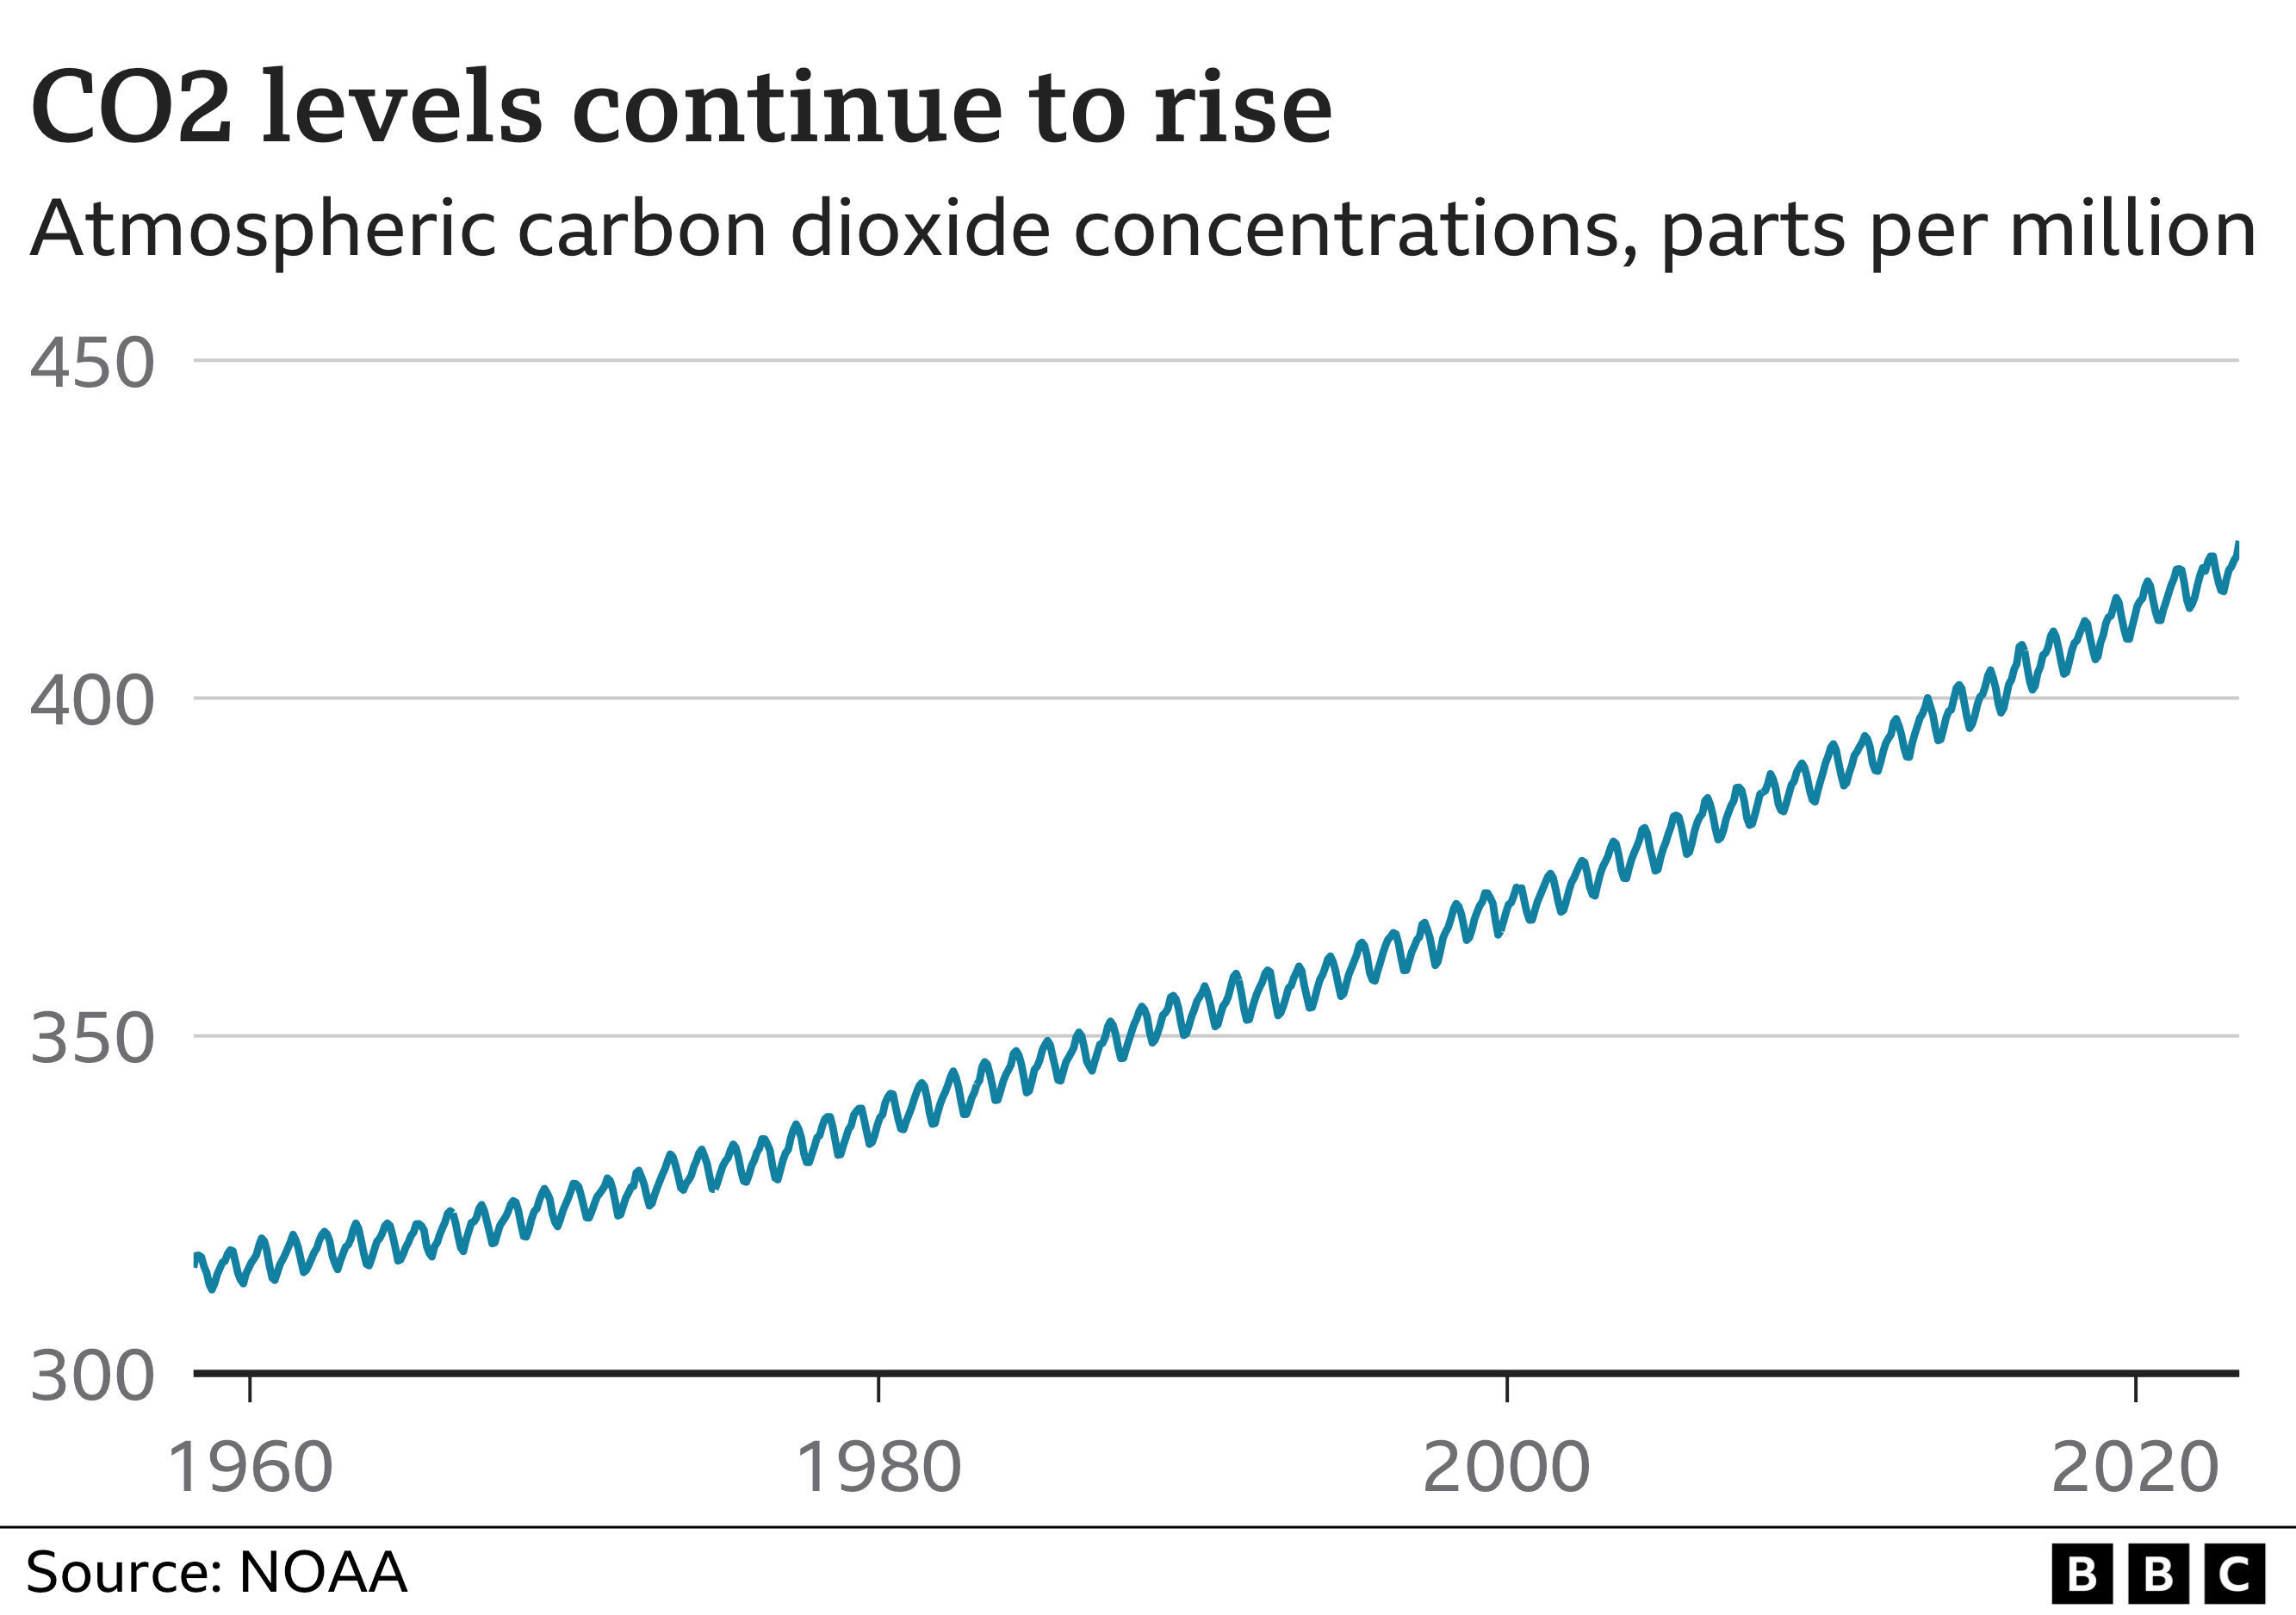 Increasing atmospheric carbon dioxide levels from the late 1950s to today. In 1960 CO2 levels were around 317 parts per million; in 2022 this was around 419ppm. The rate of increase has been consistent over time. On top of the long term increasing trend, levels dip up and down slightly within each year. [May 2023]